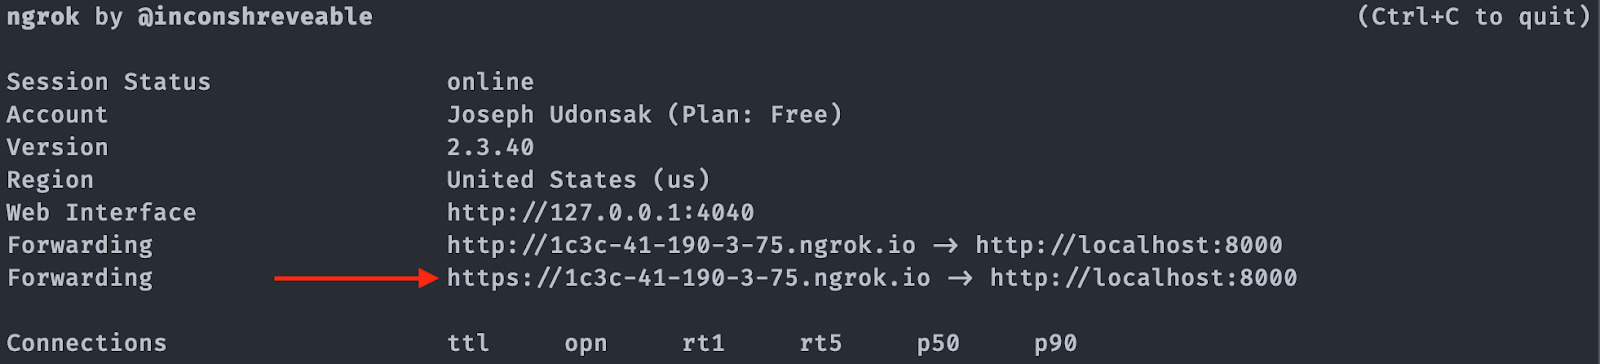 ngrok output showing the forwarding URL, session status, etc.